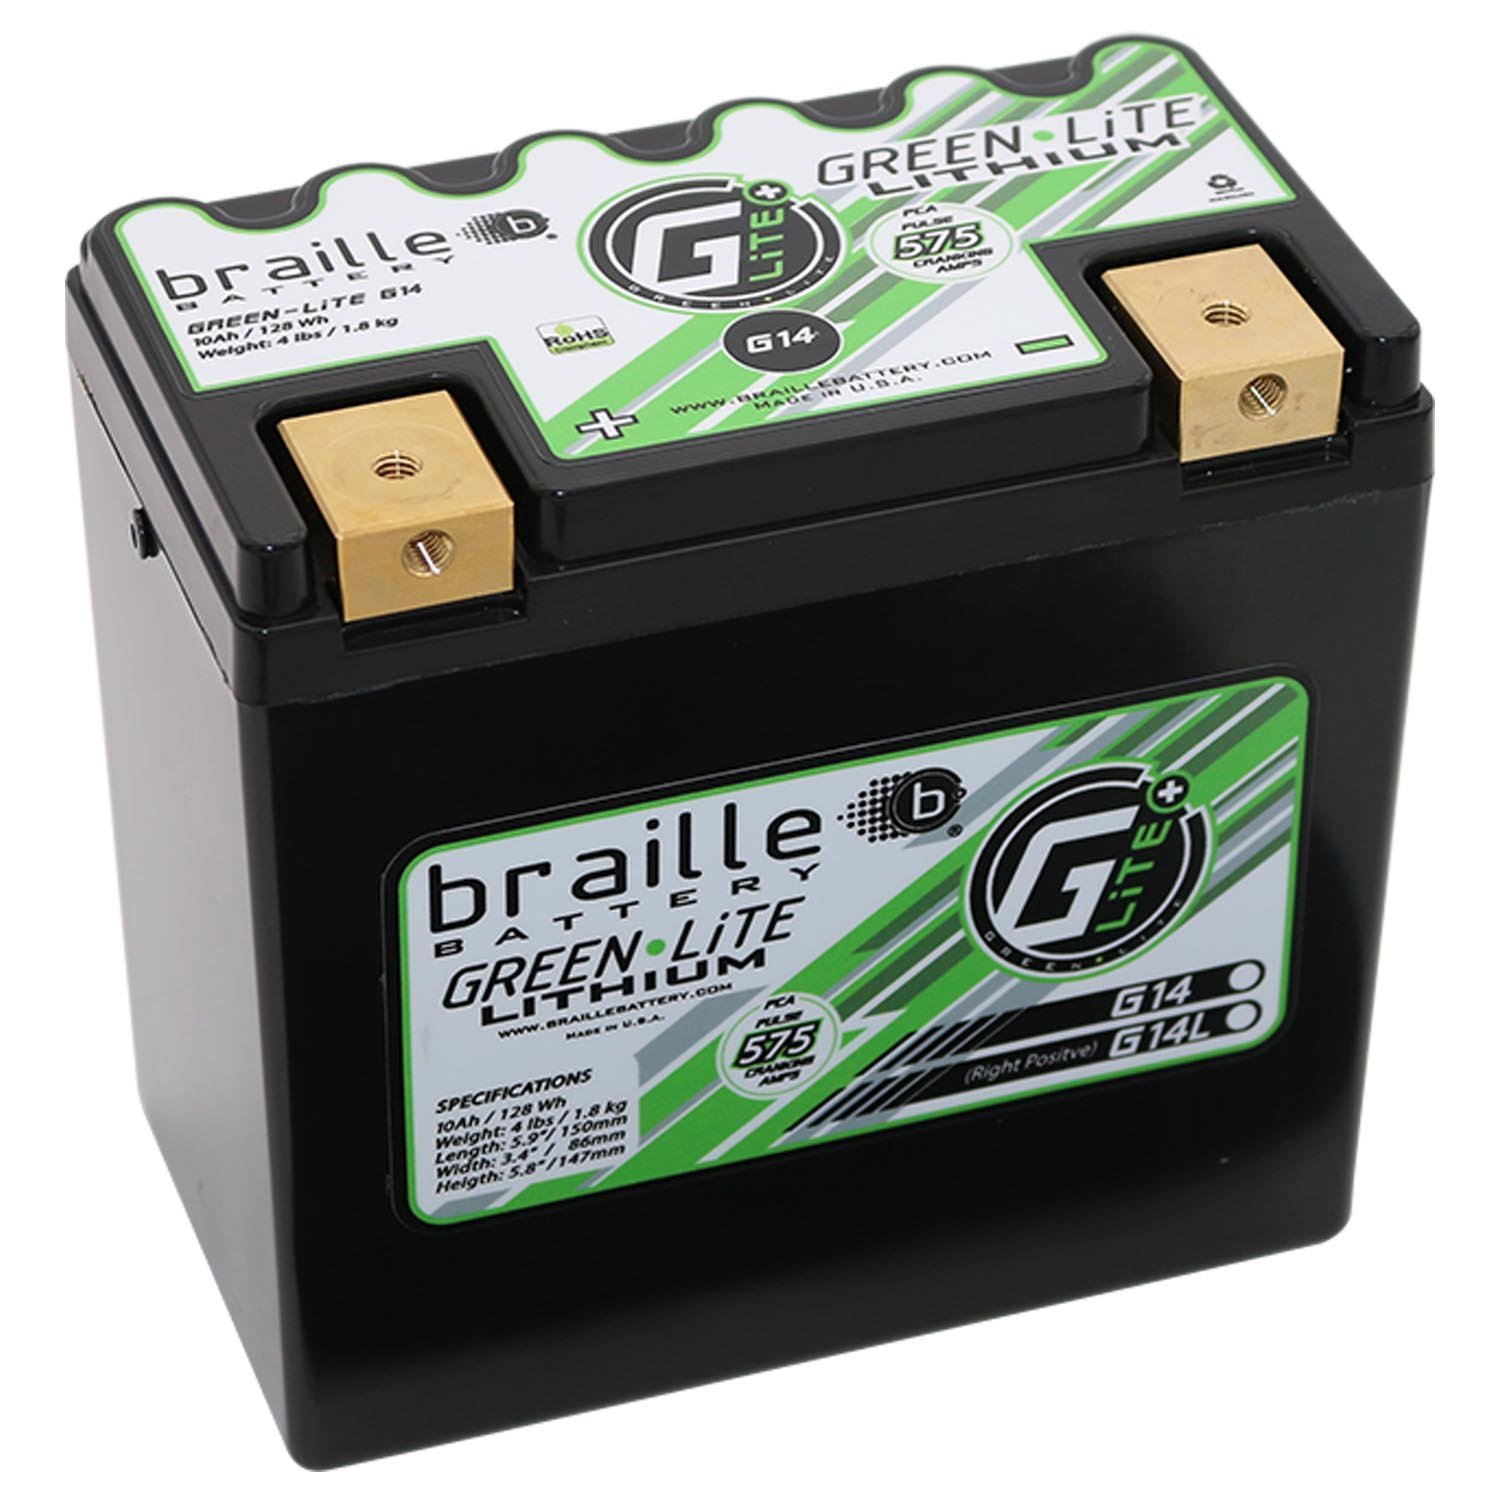 Green-Lite Lithium-Ion 12 V Powersports Battery, BCI Group: 14, Pulse Cranking Amps (PCA): 575 - Left Side Positive Terminal